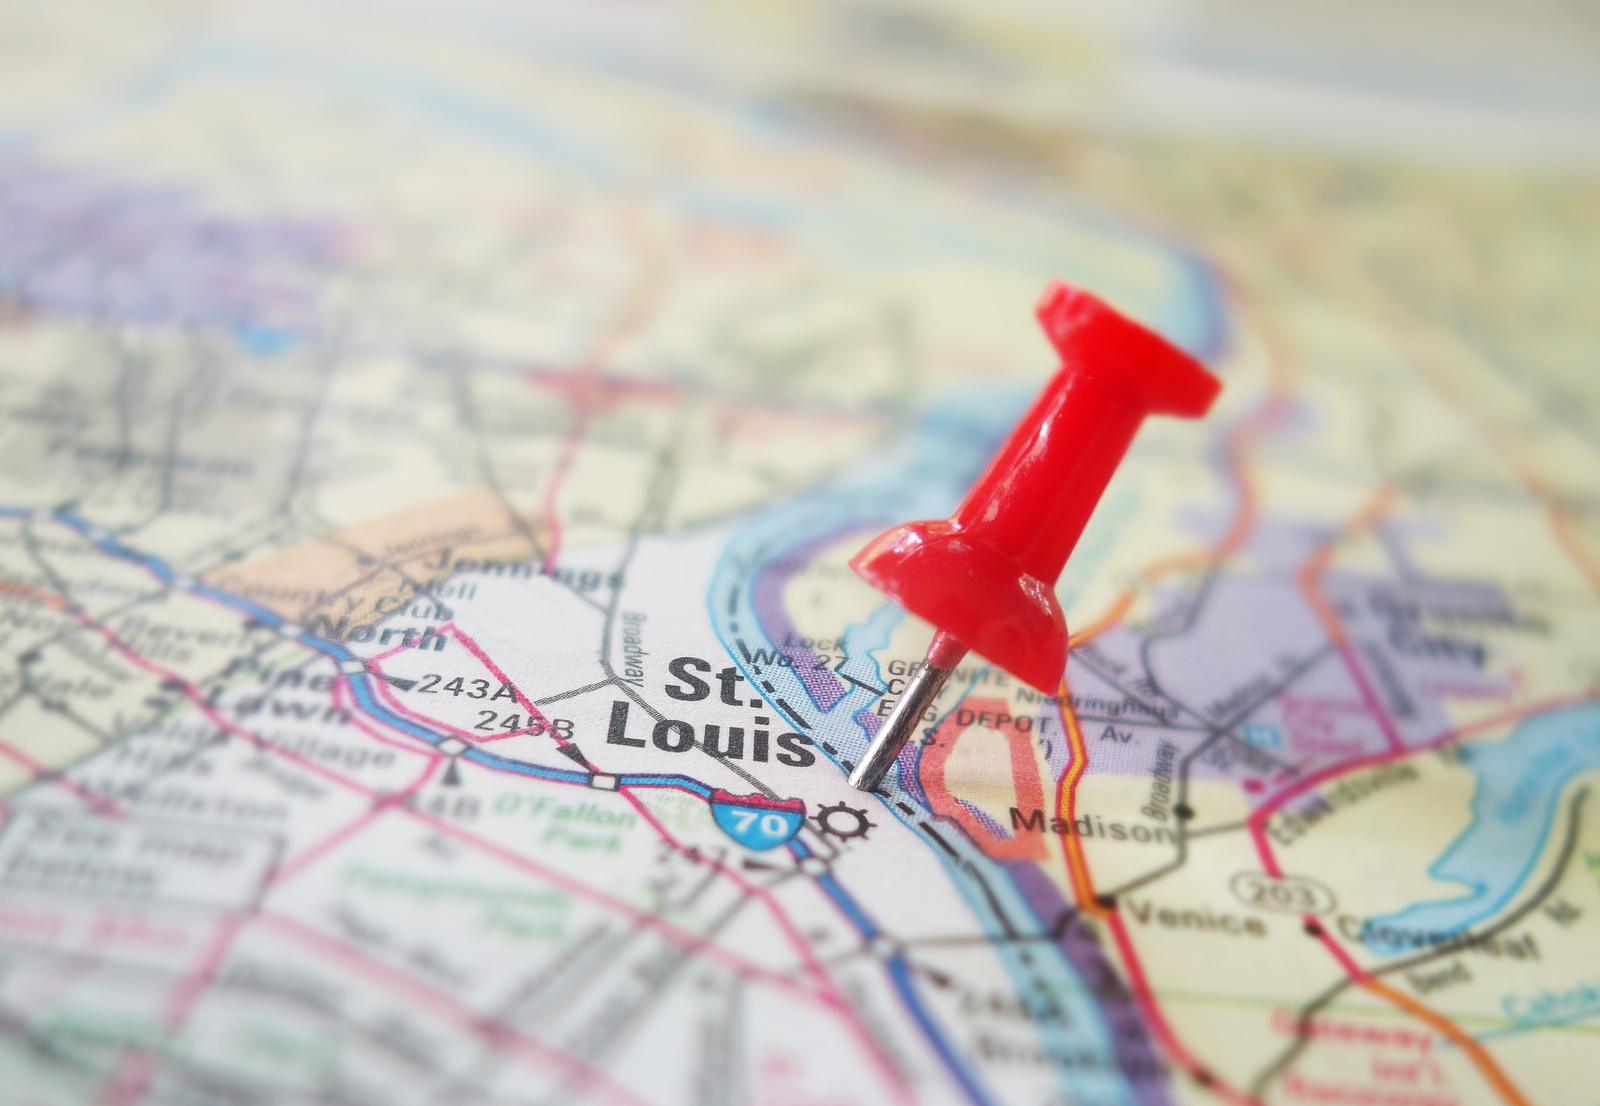 image of a red pin sticking in a map of St. Louis — businesses in St. Louis